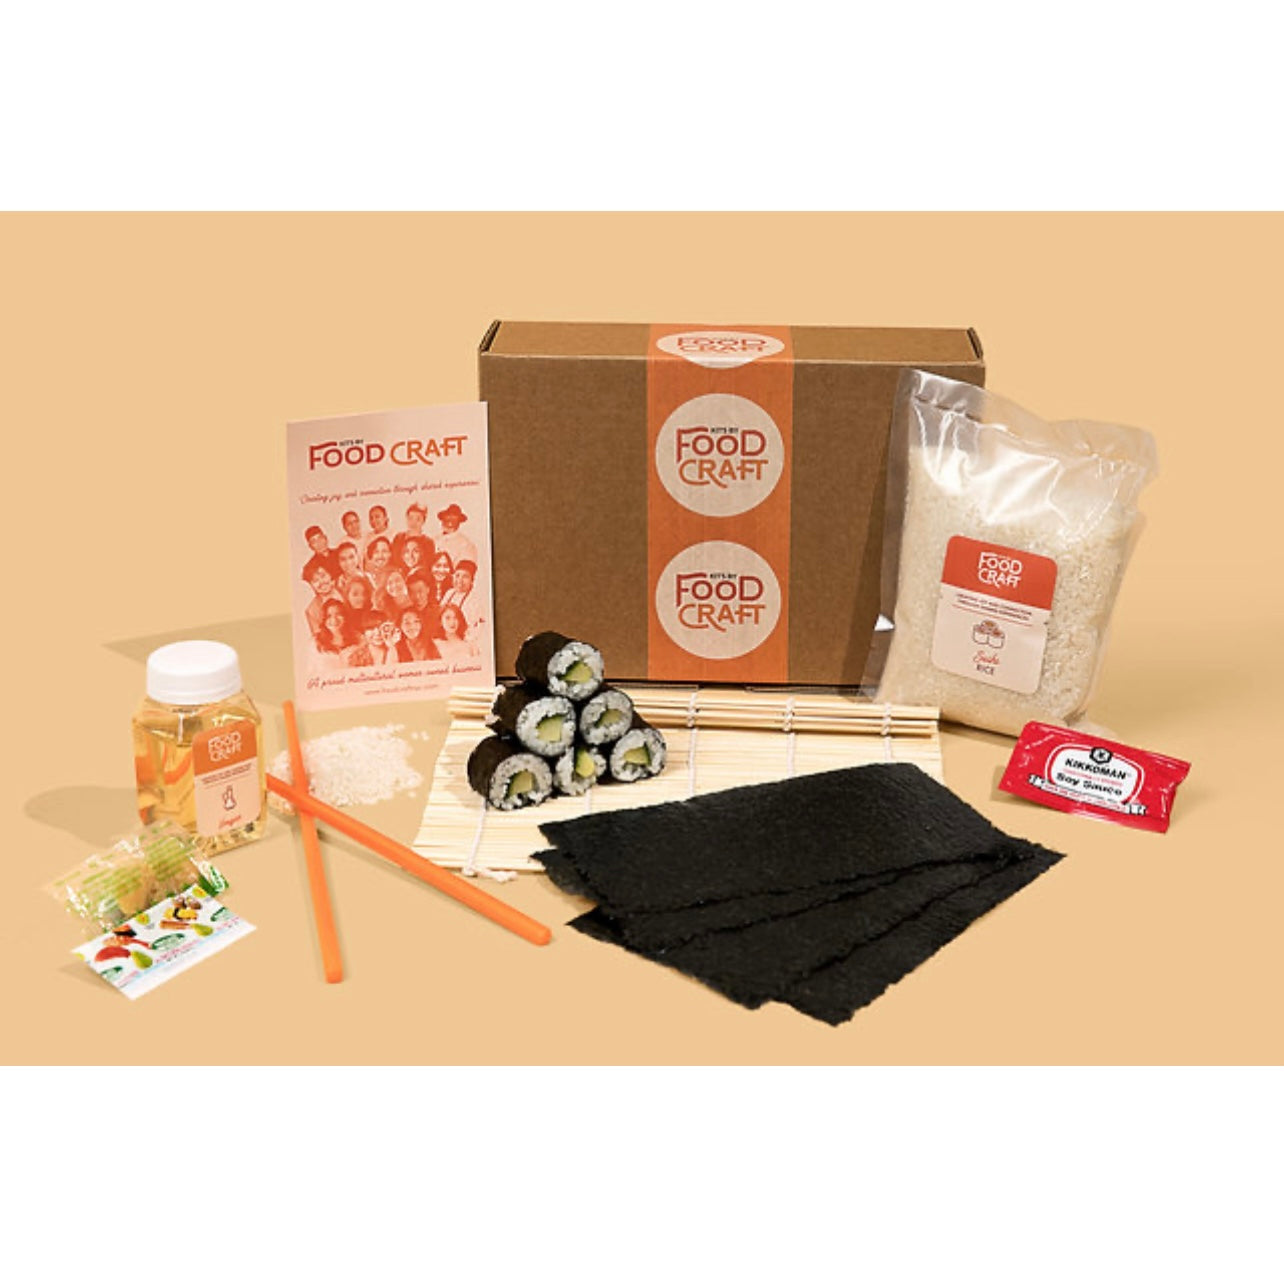 All-Inclusive Shiitake Sushi Making Kit | DIY Kit | Vegetarian | Includes Miso Soup, 10 Rolls & Spicy Mayo All-Inclusive Shiitake Sushi Making Kit | DIY Kit | Vegetarian | Includes Miso Soup, 10 Rolls & Spicy Mayo